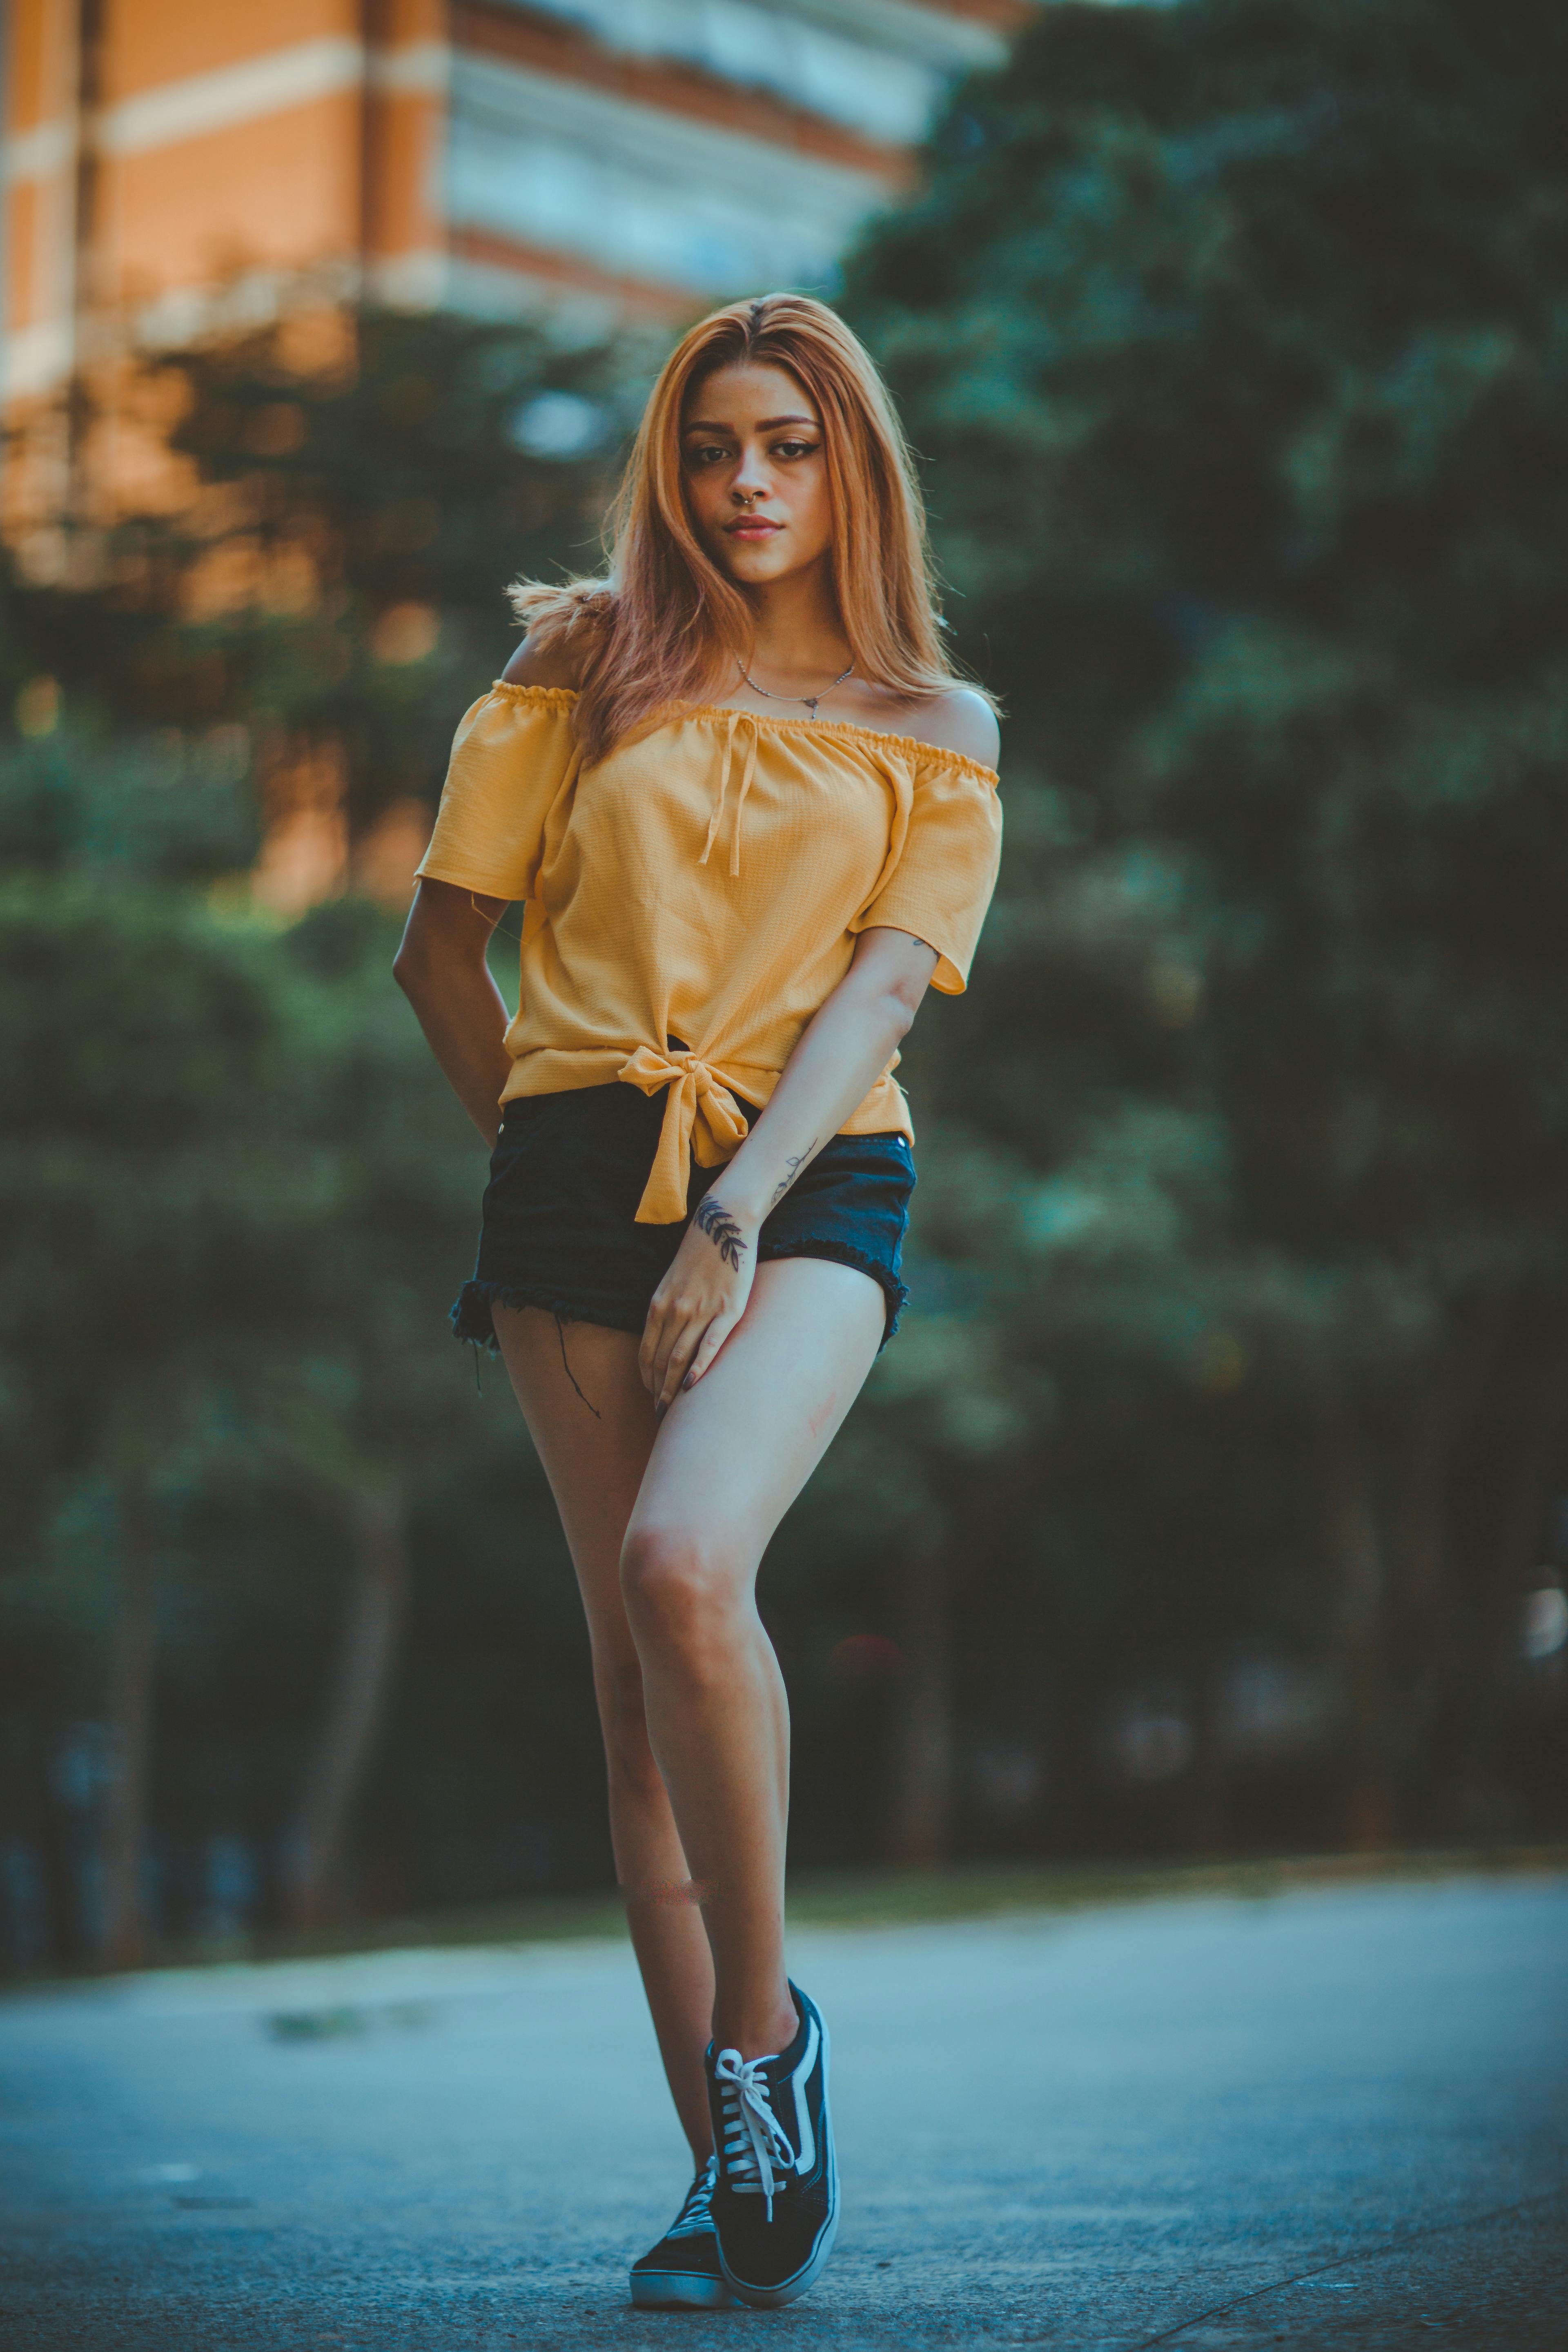 Free: Woman Wearing Yellow Off-shoulder Blouse Standing on Road - nohat.cc